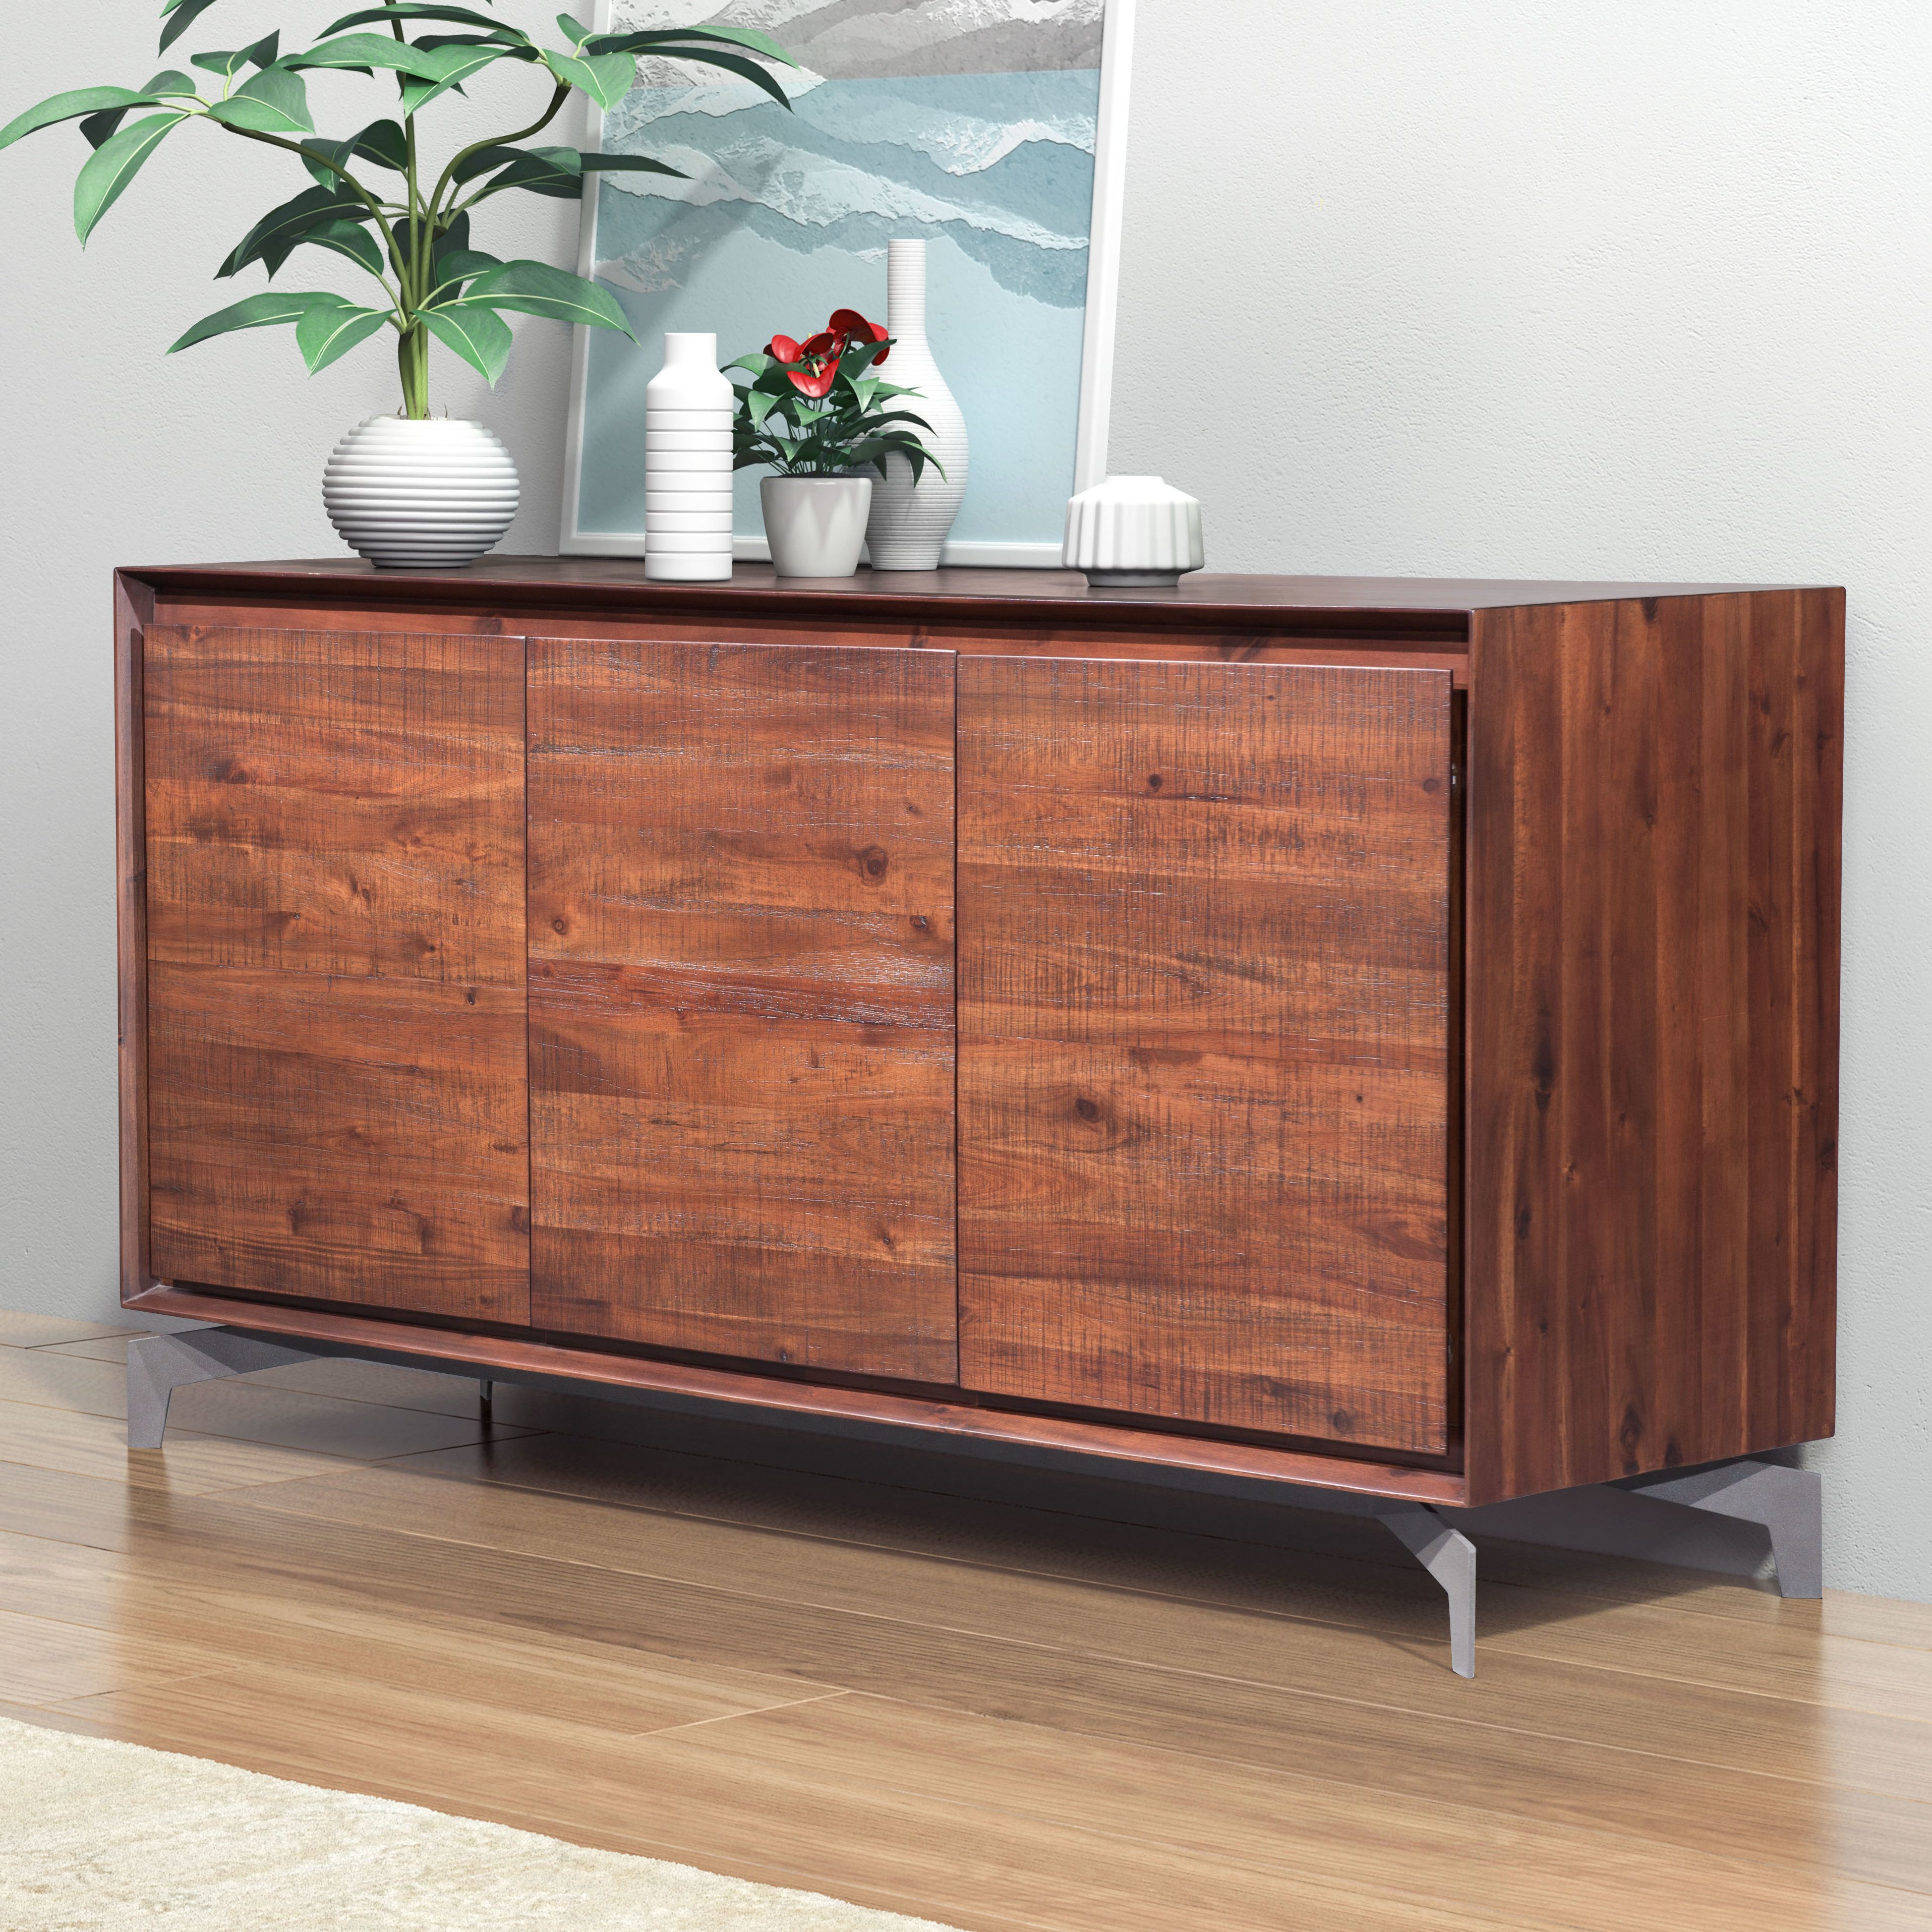 Riggleman Sideboard | Joss & Main With Regard To Armelle Sideboards (View 9 of 20)